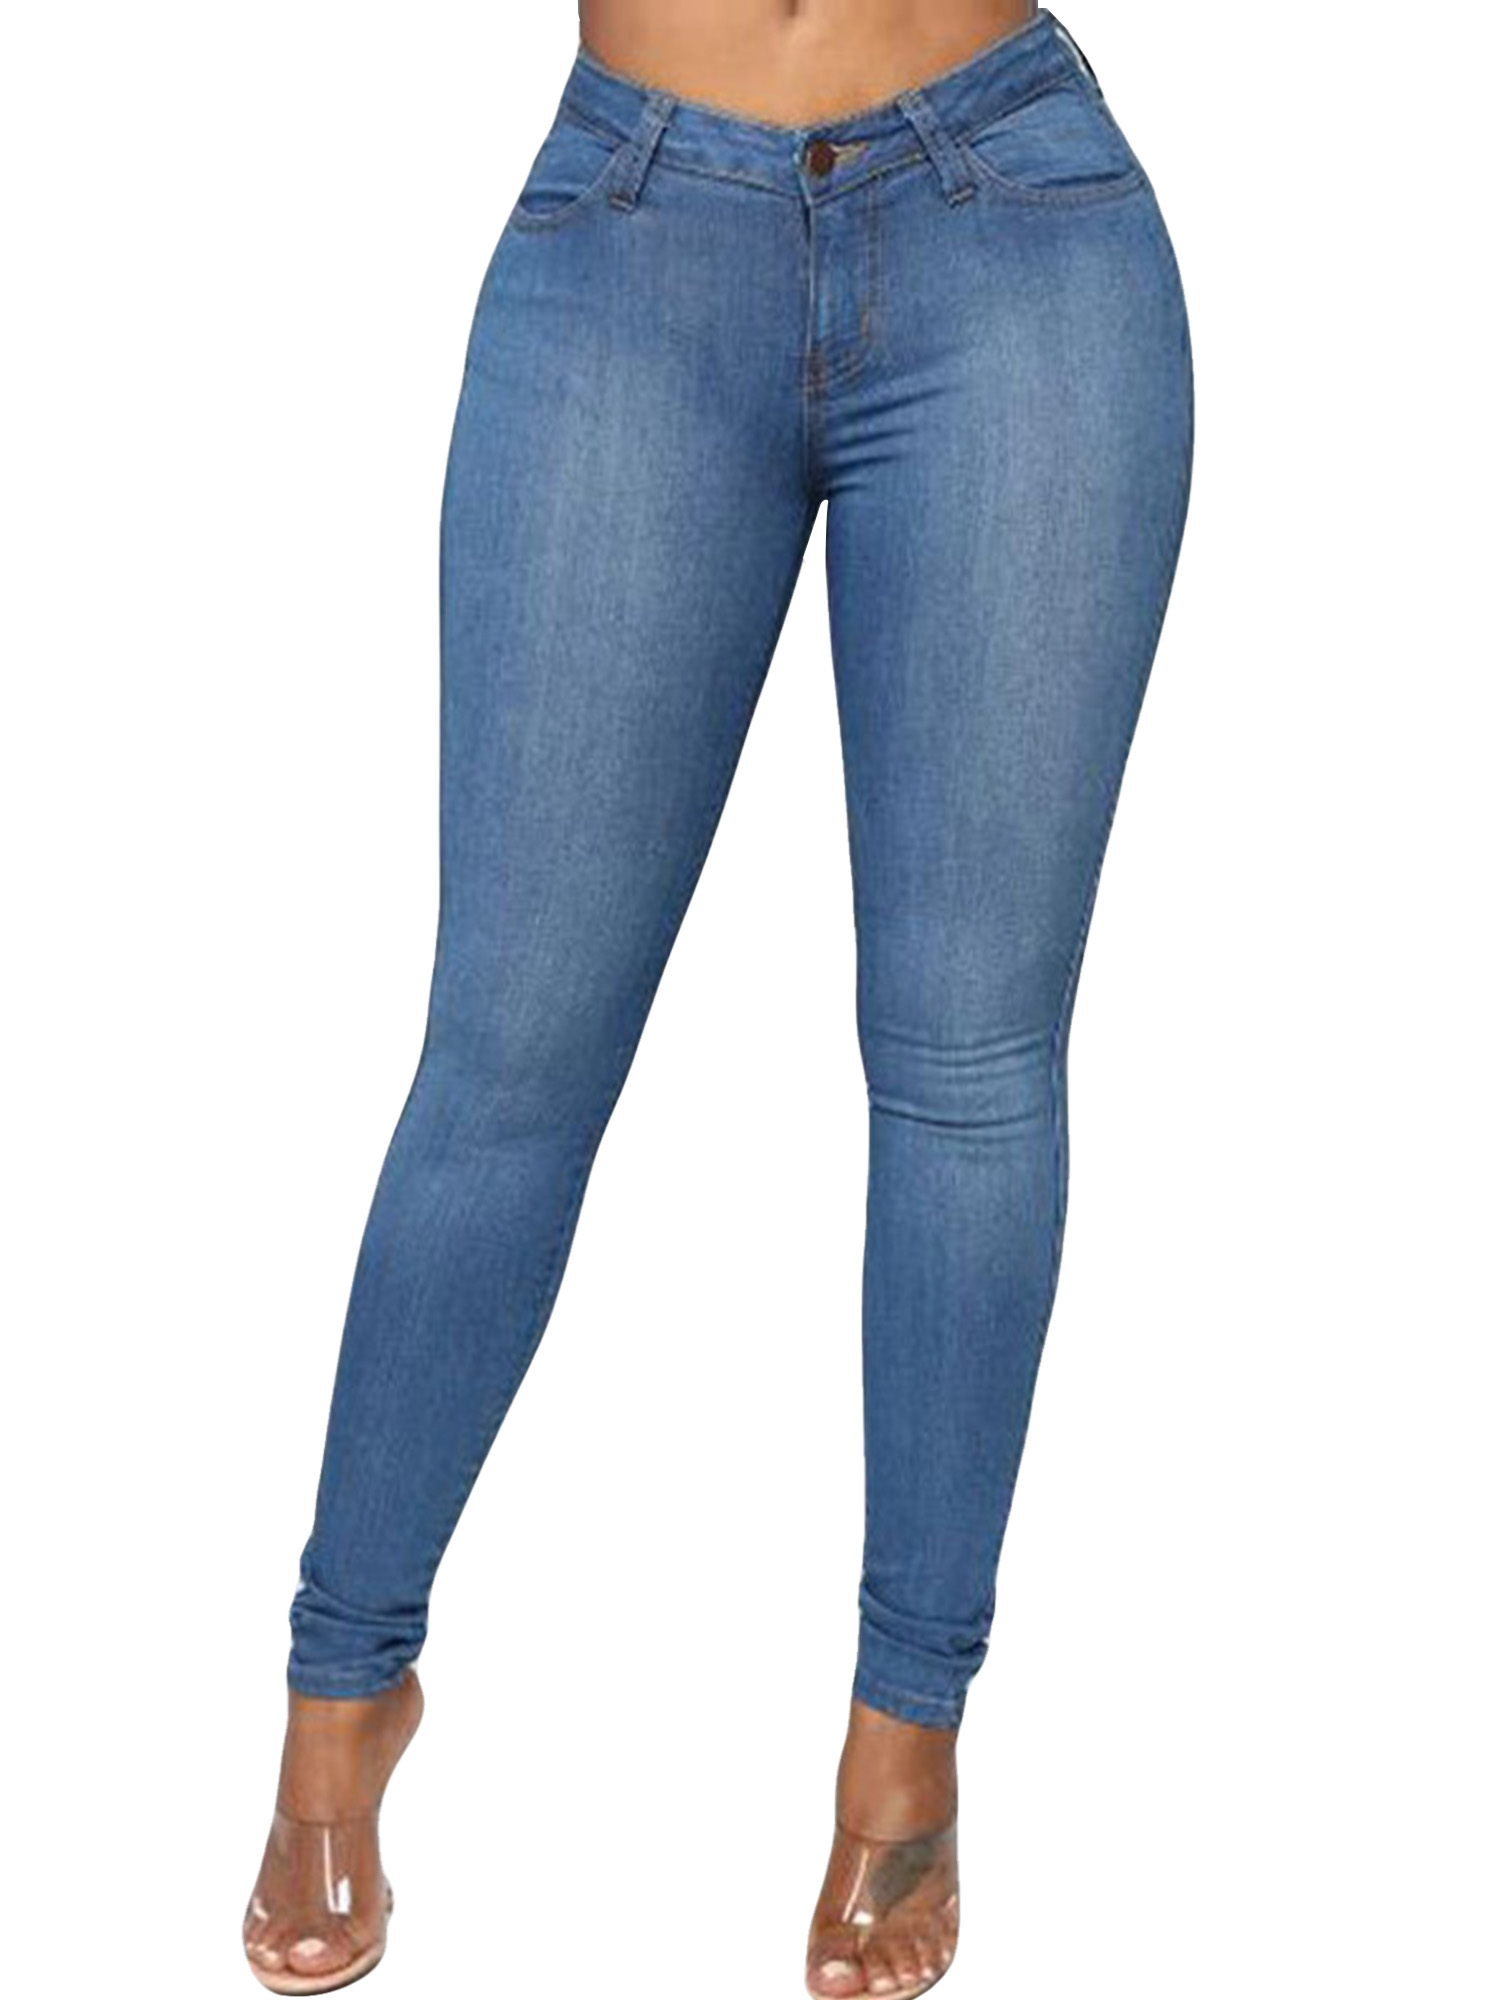 Women High Rise Distressed Solid Stretch Sexy Skinny Leg Denim Jeans Bodycon Jeggings Pencil Pants Trousers With Pockets - image 1 of 3